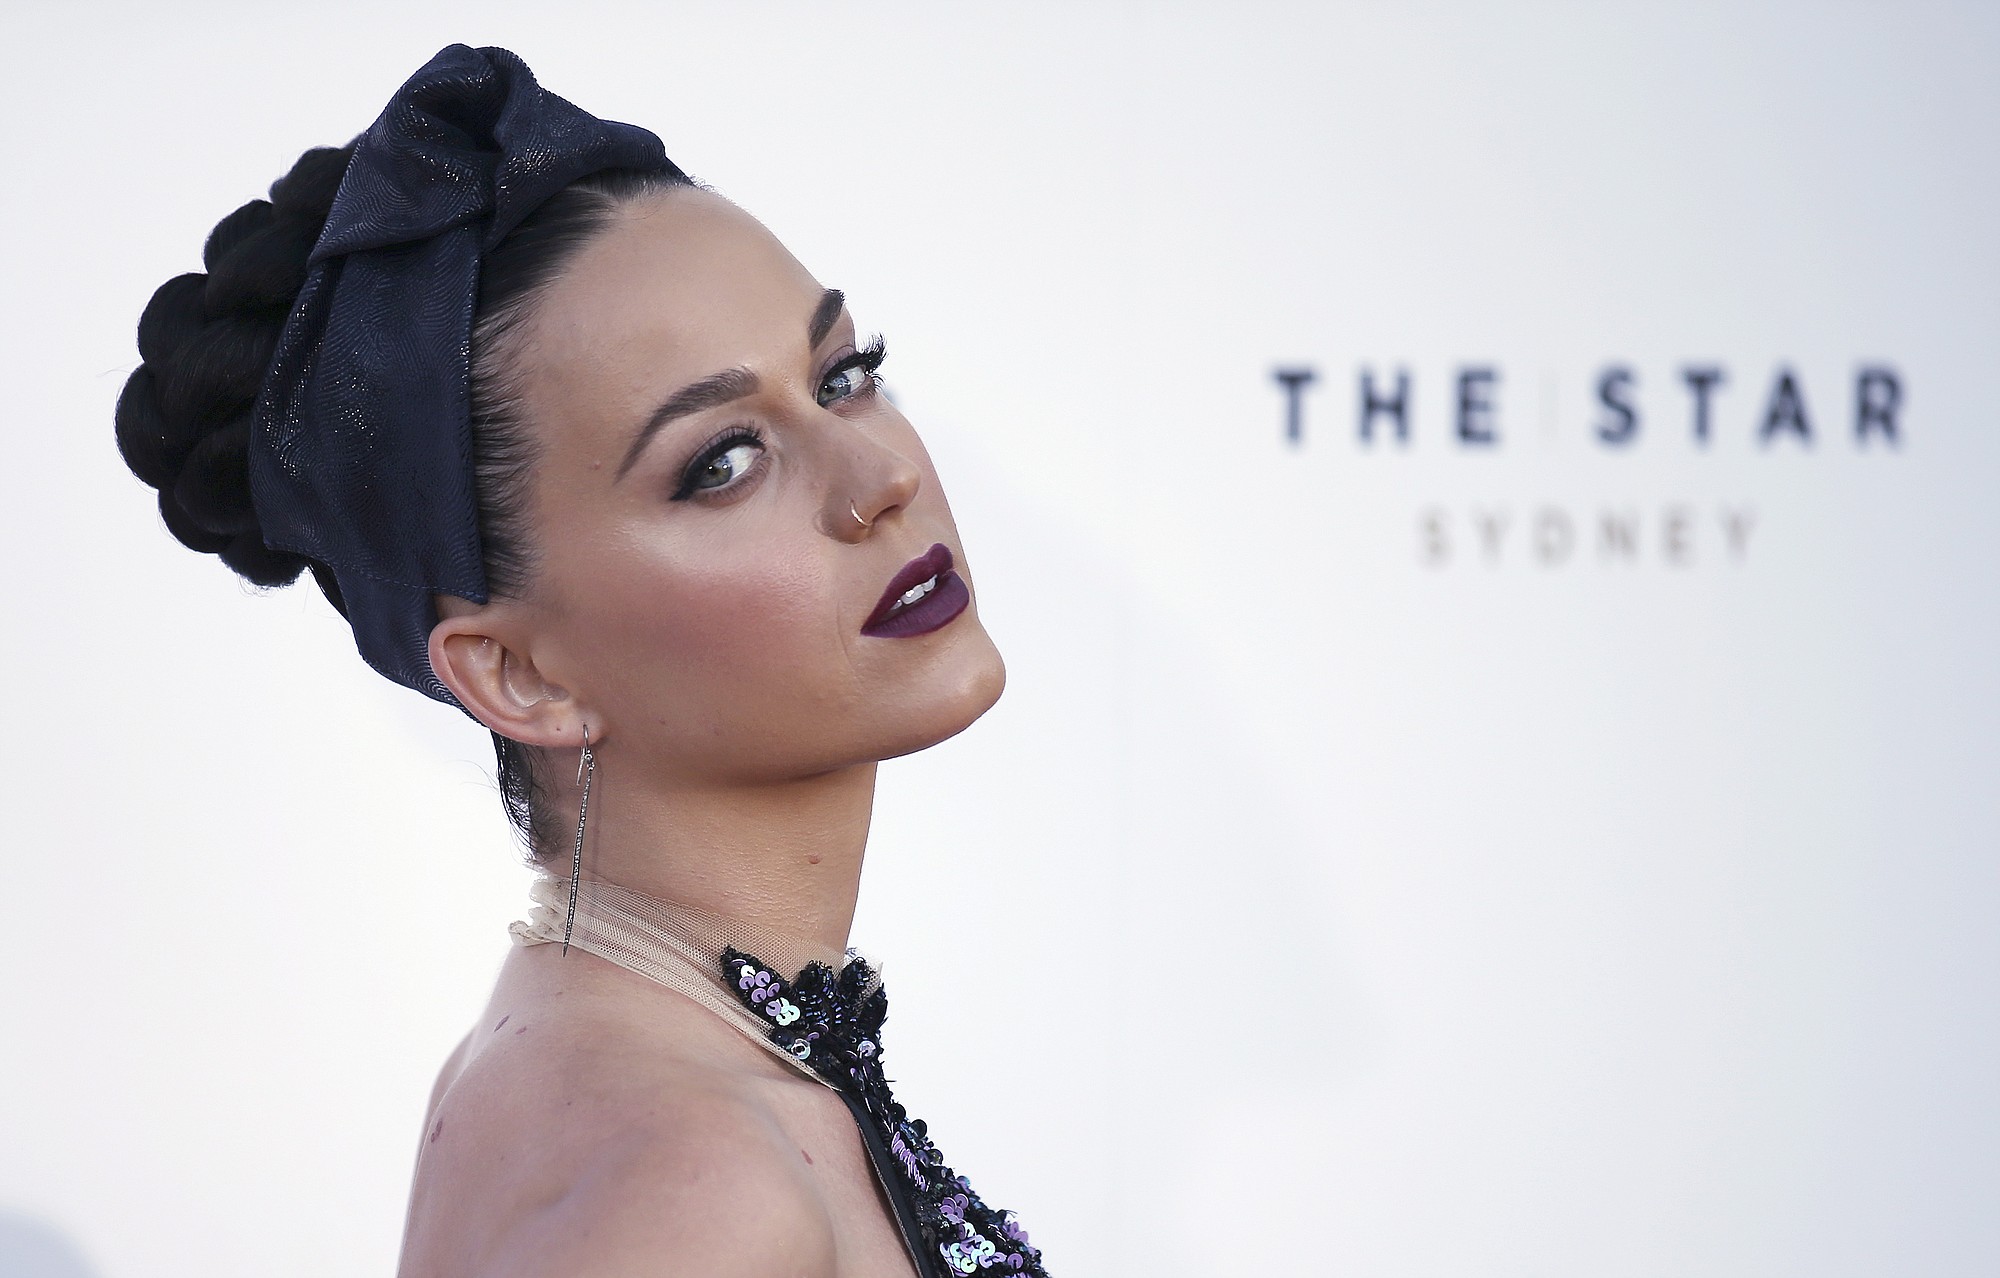 Pop star Katy Perry says her female empowerment anthems make her the ideal Super Bowl halftime performer for the Feb.